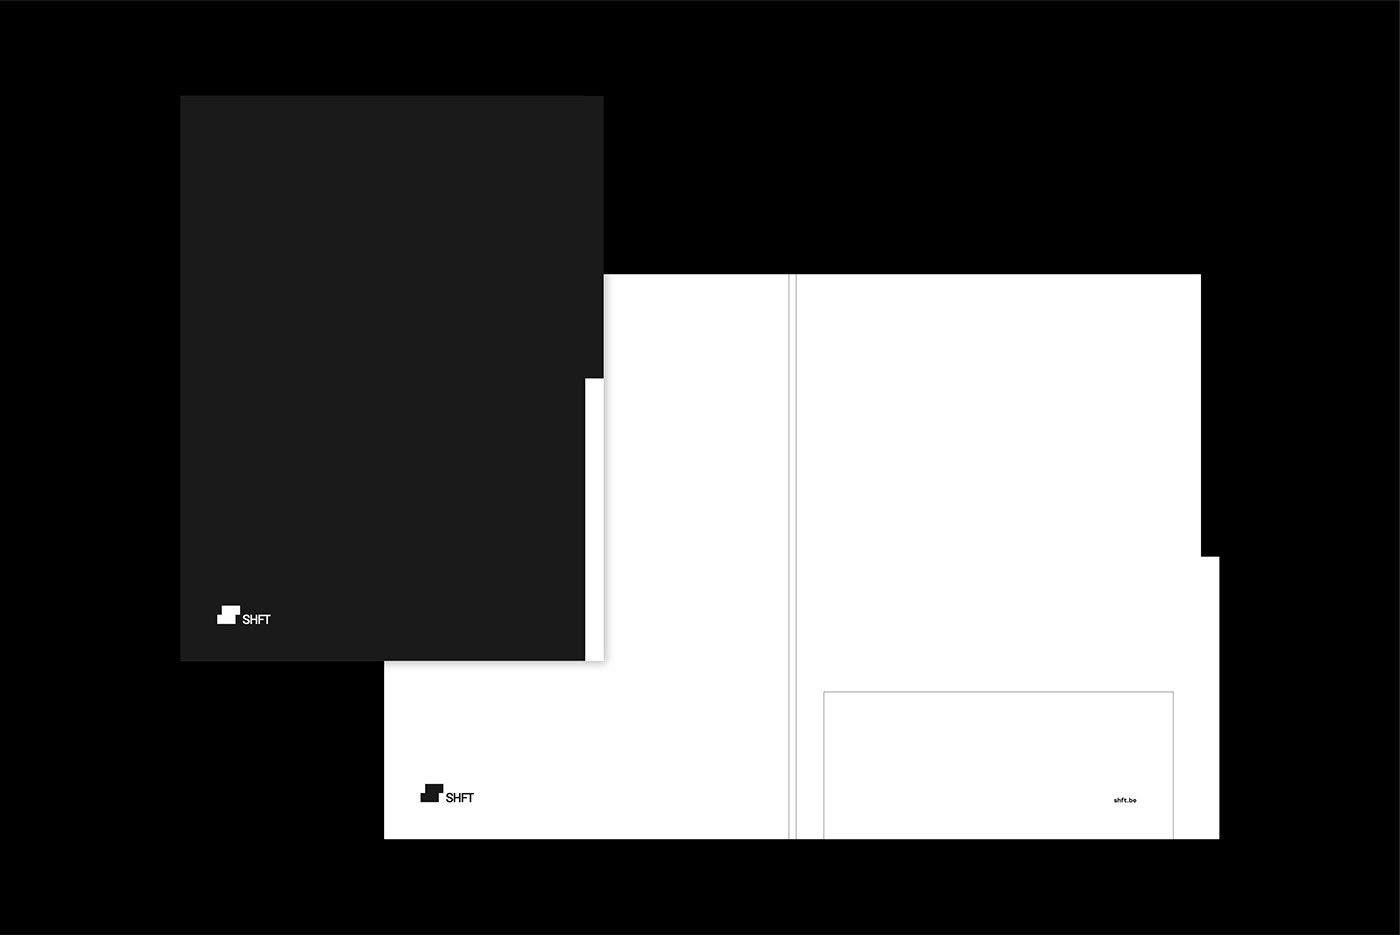 Stationary mockup in black and white for SHFT.